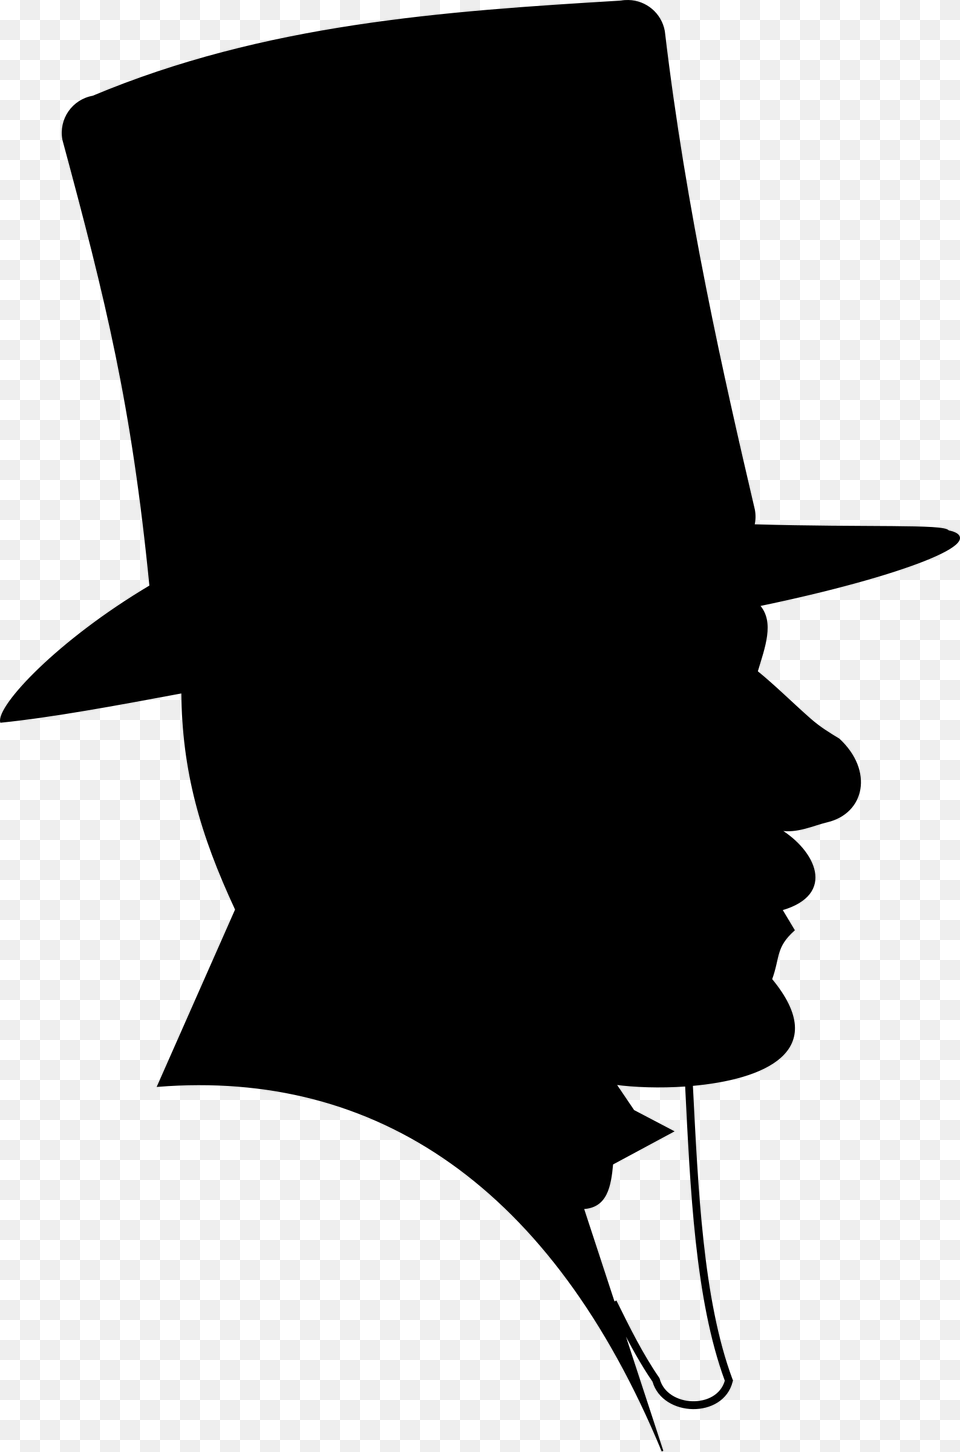 Public Domain Clip Art Image Victorian Man With Top Man In Top Hat Silhouette, Gray Free Png Download